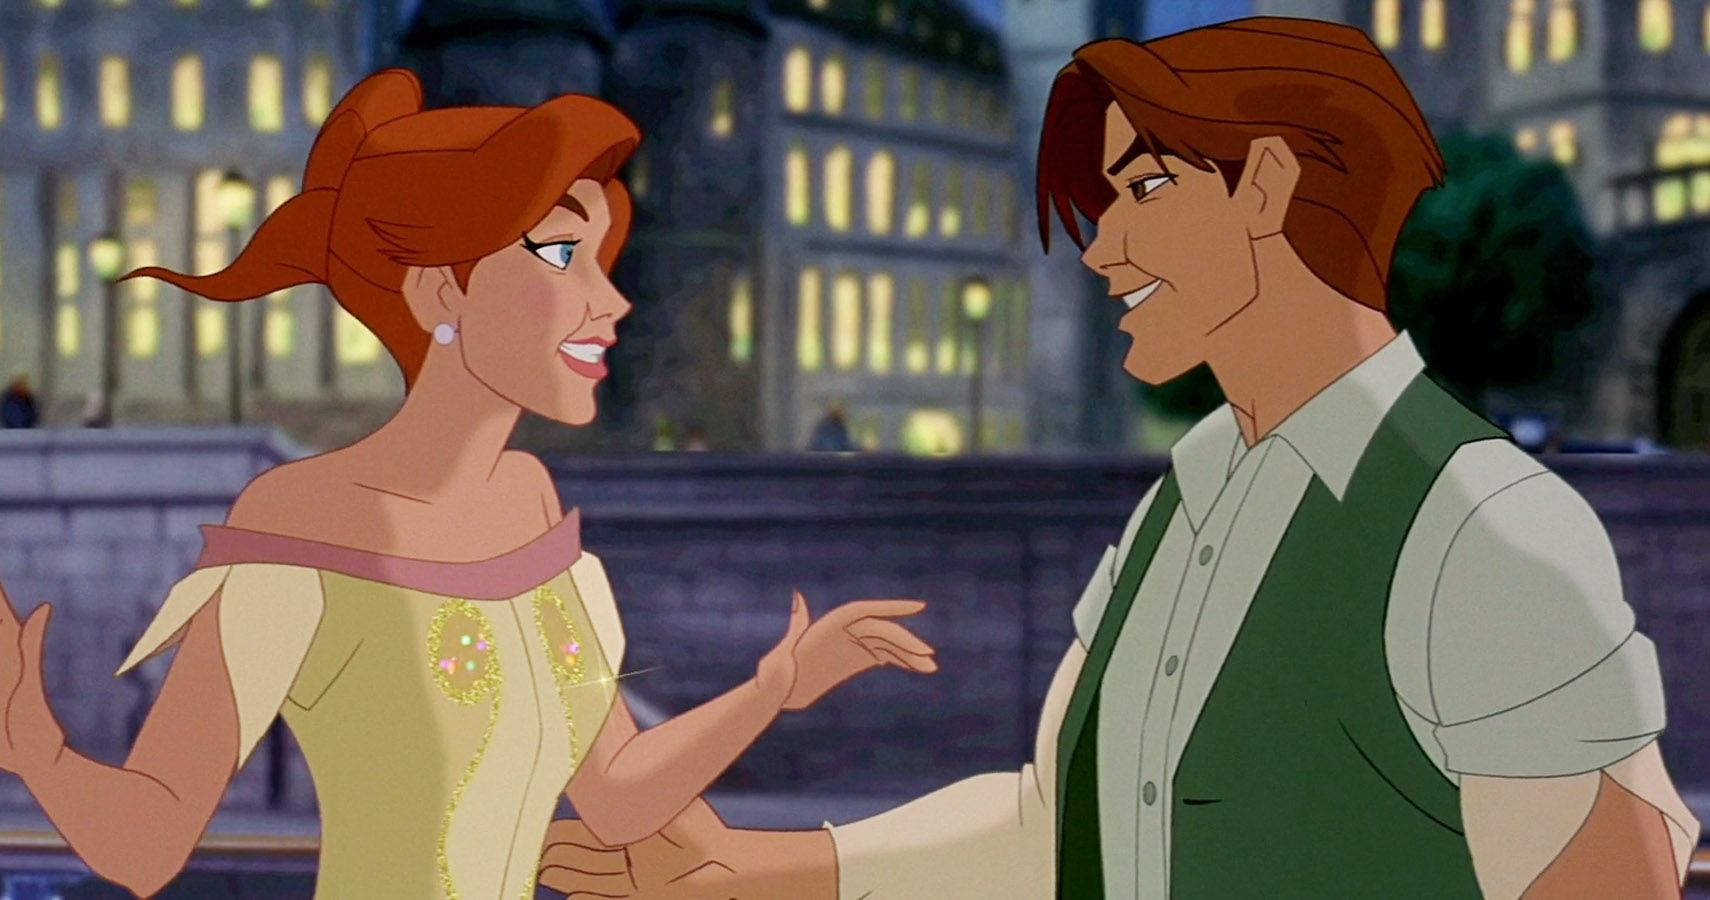 The Other Princess: 25 Things About The Anastasia Movie That Make No Sense